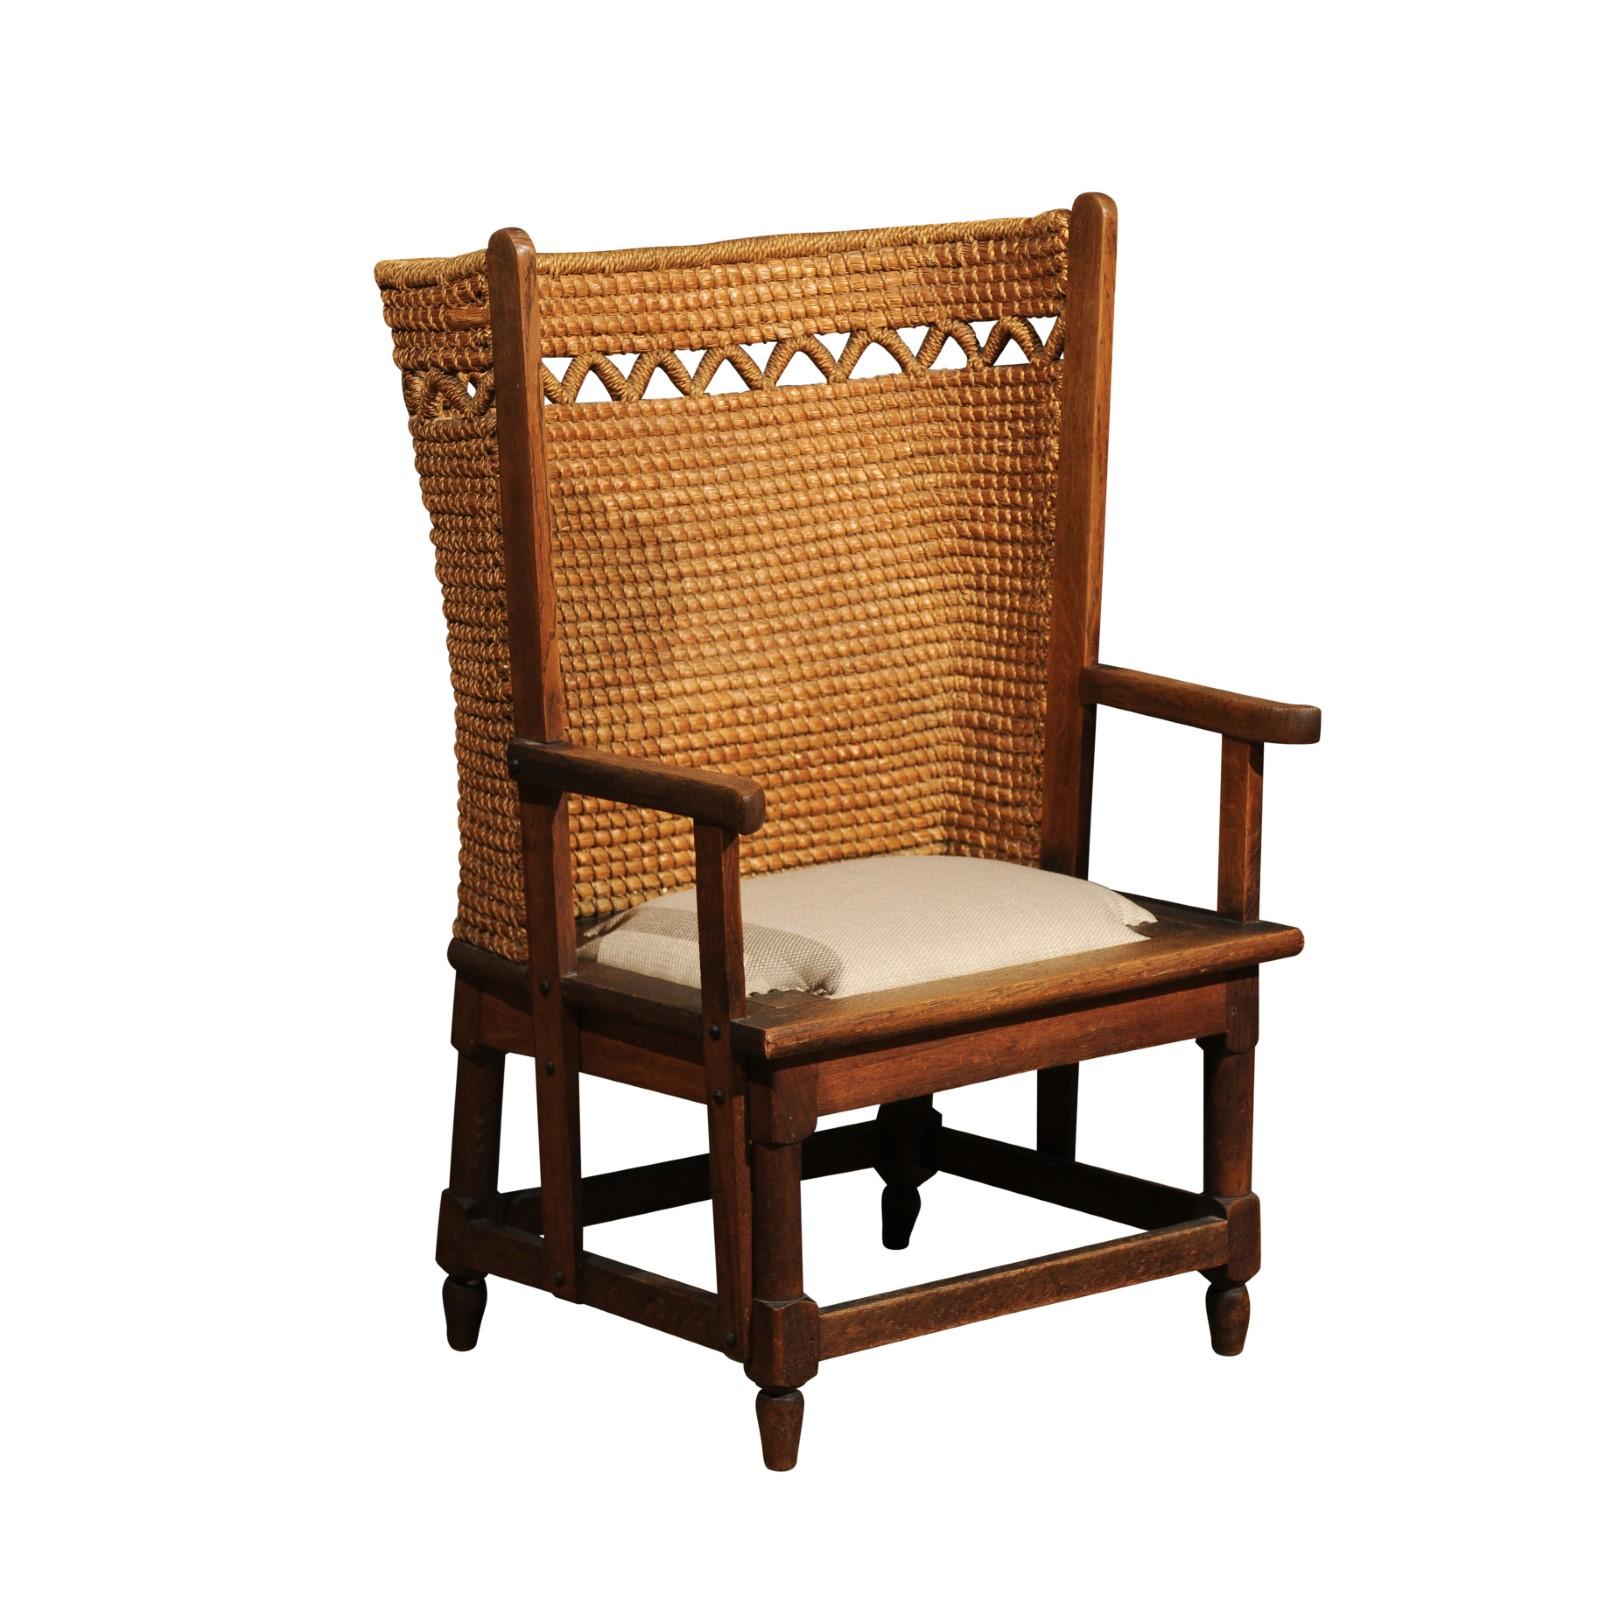 19th Century Scottish Orkney Chair with Handwoven Straw Back and Zigzag Patterns